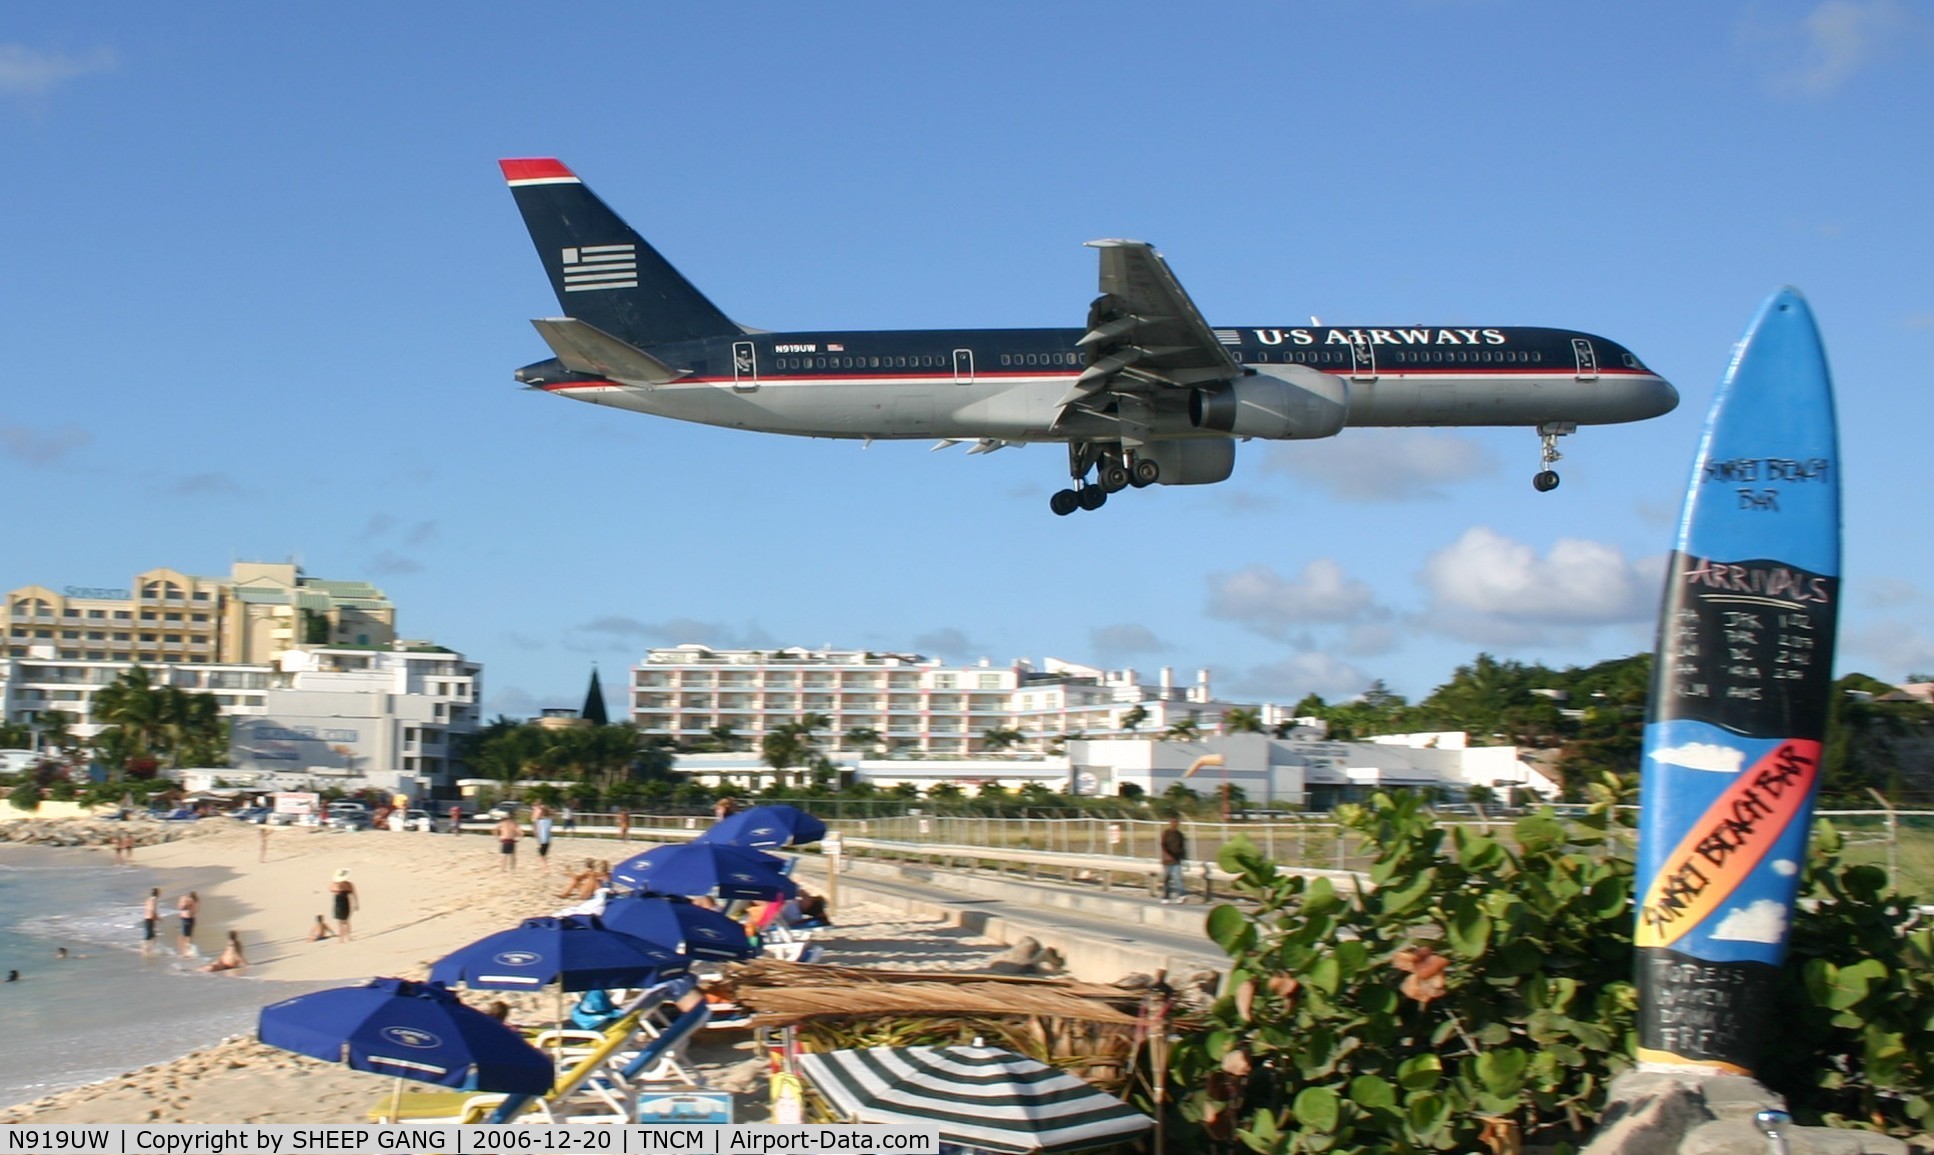 N919UW, 1982 Boeing 757-225 C/N 22198, landing at tncm. with the sufboard of sunset beach bar in the forground